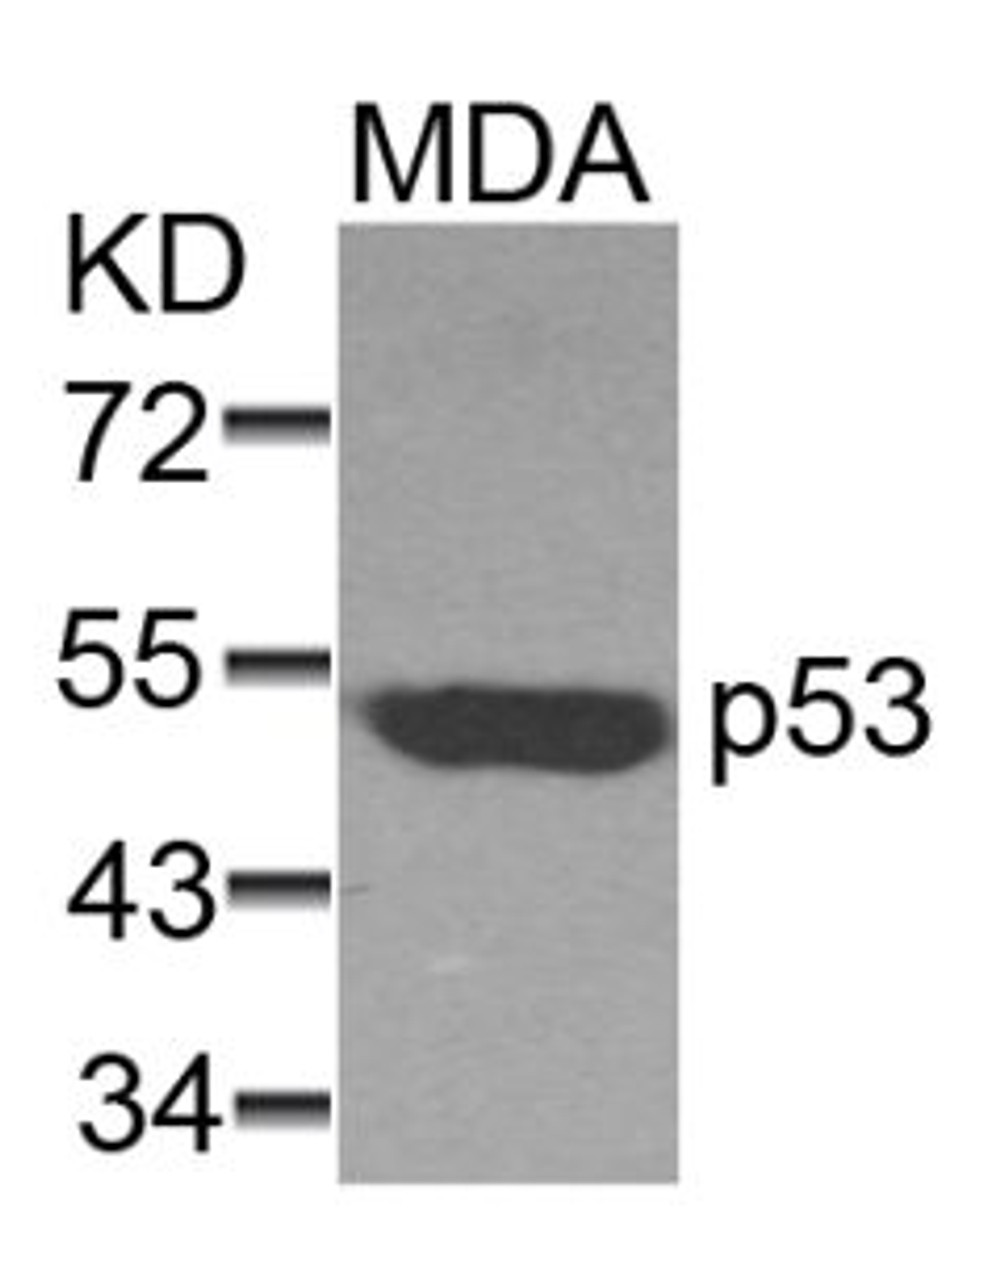 Western blot analysis of lysed extracts from MDA cells using p53 (Ab-37) .